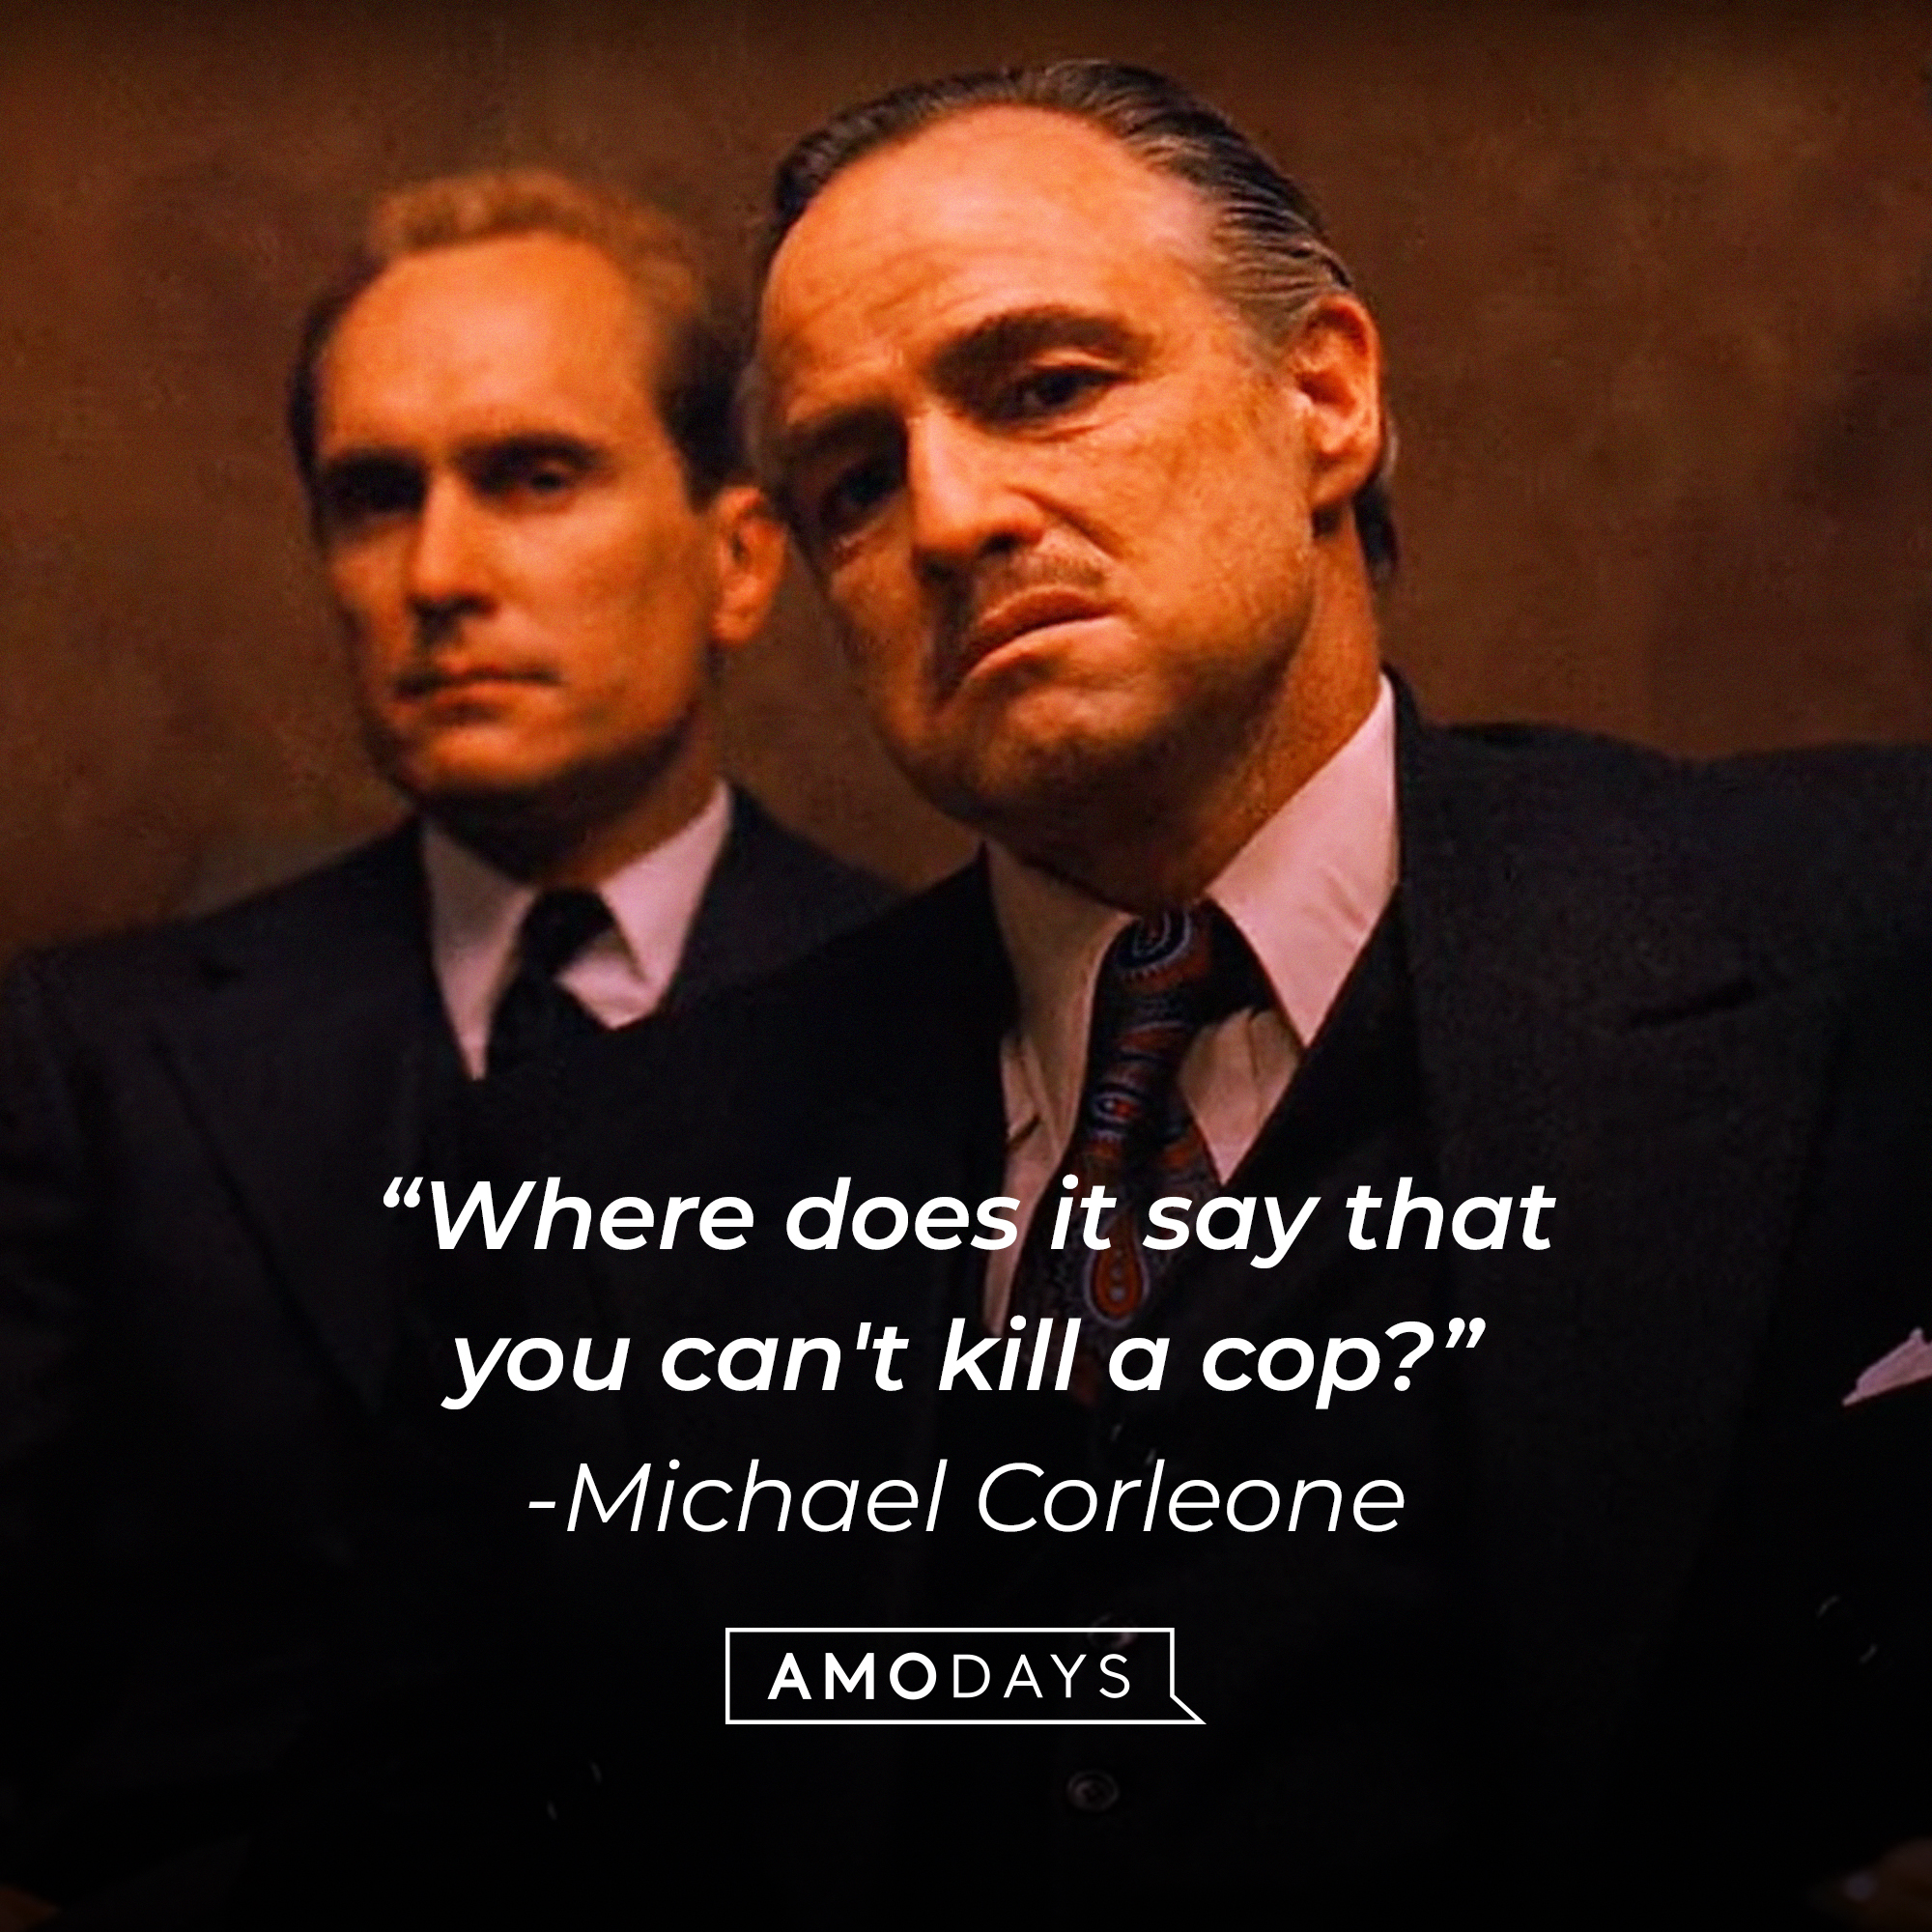 Michael Corleone's quote: "Where does it say that you can't kill a cop?" | Source: Facebook/thegodfather